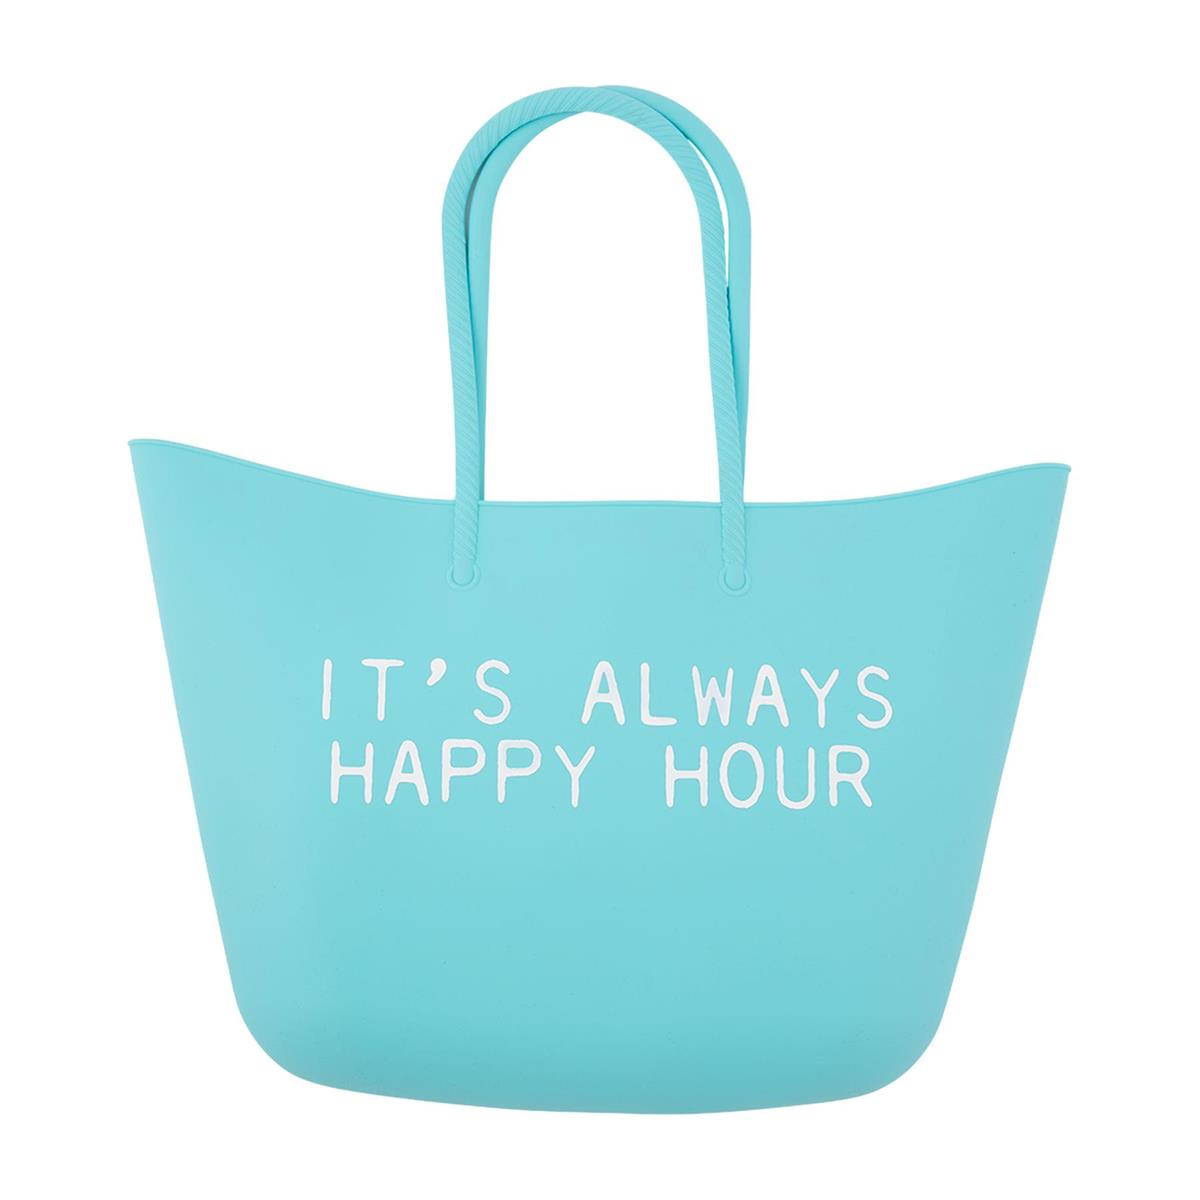 Summer Silicone Cooler Totes